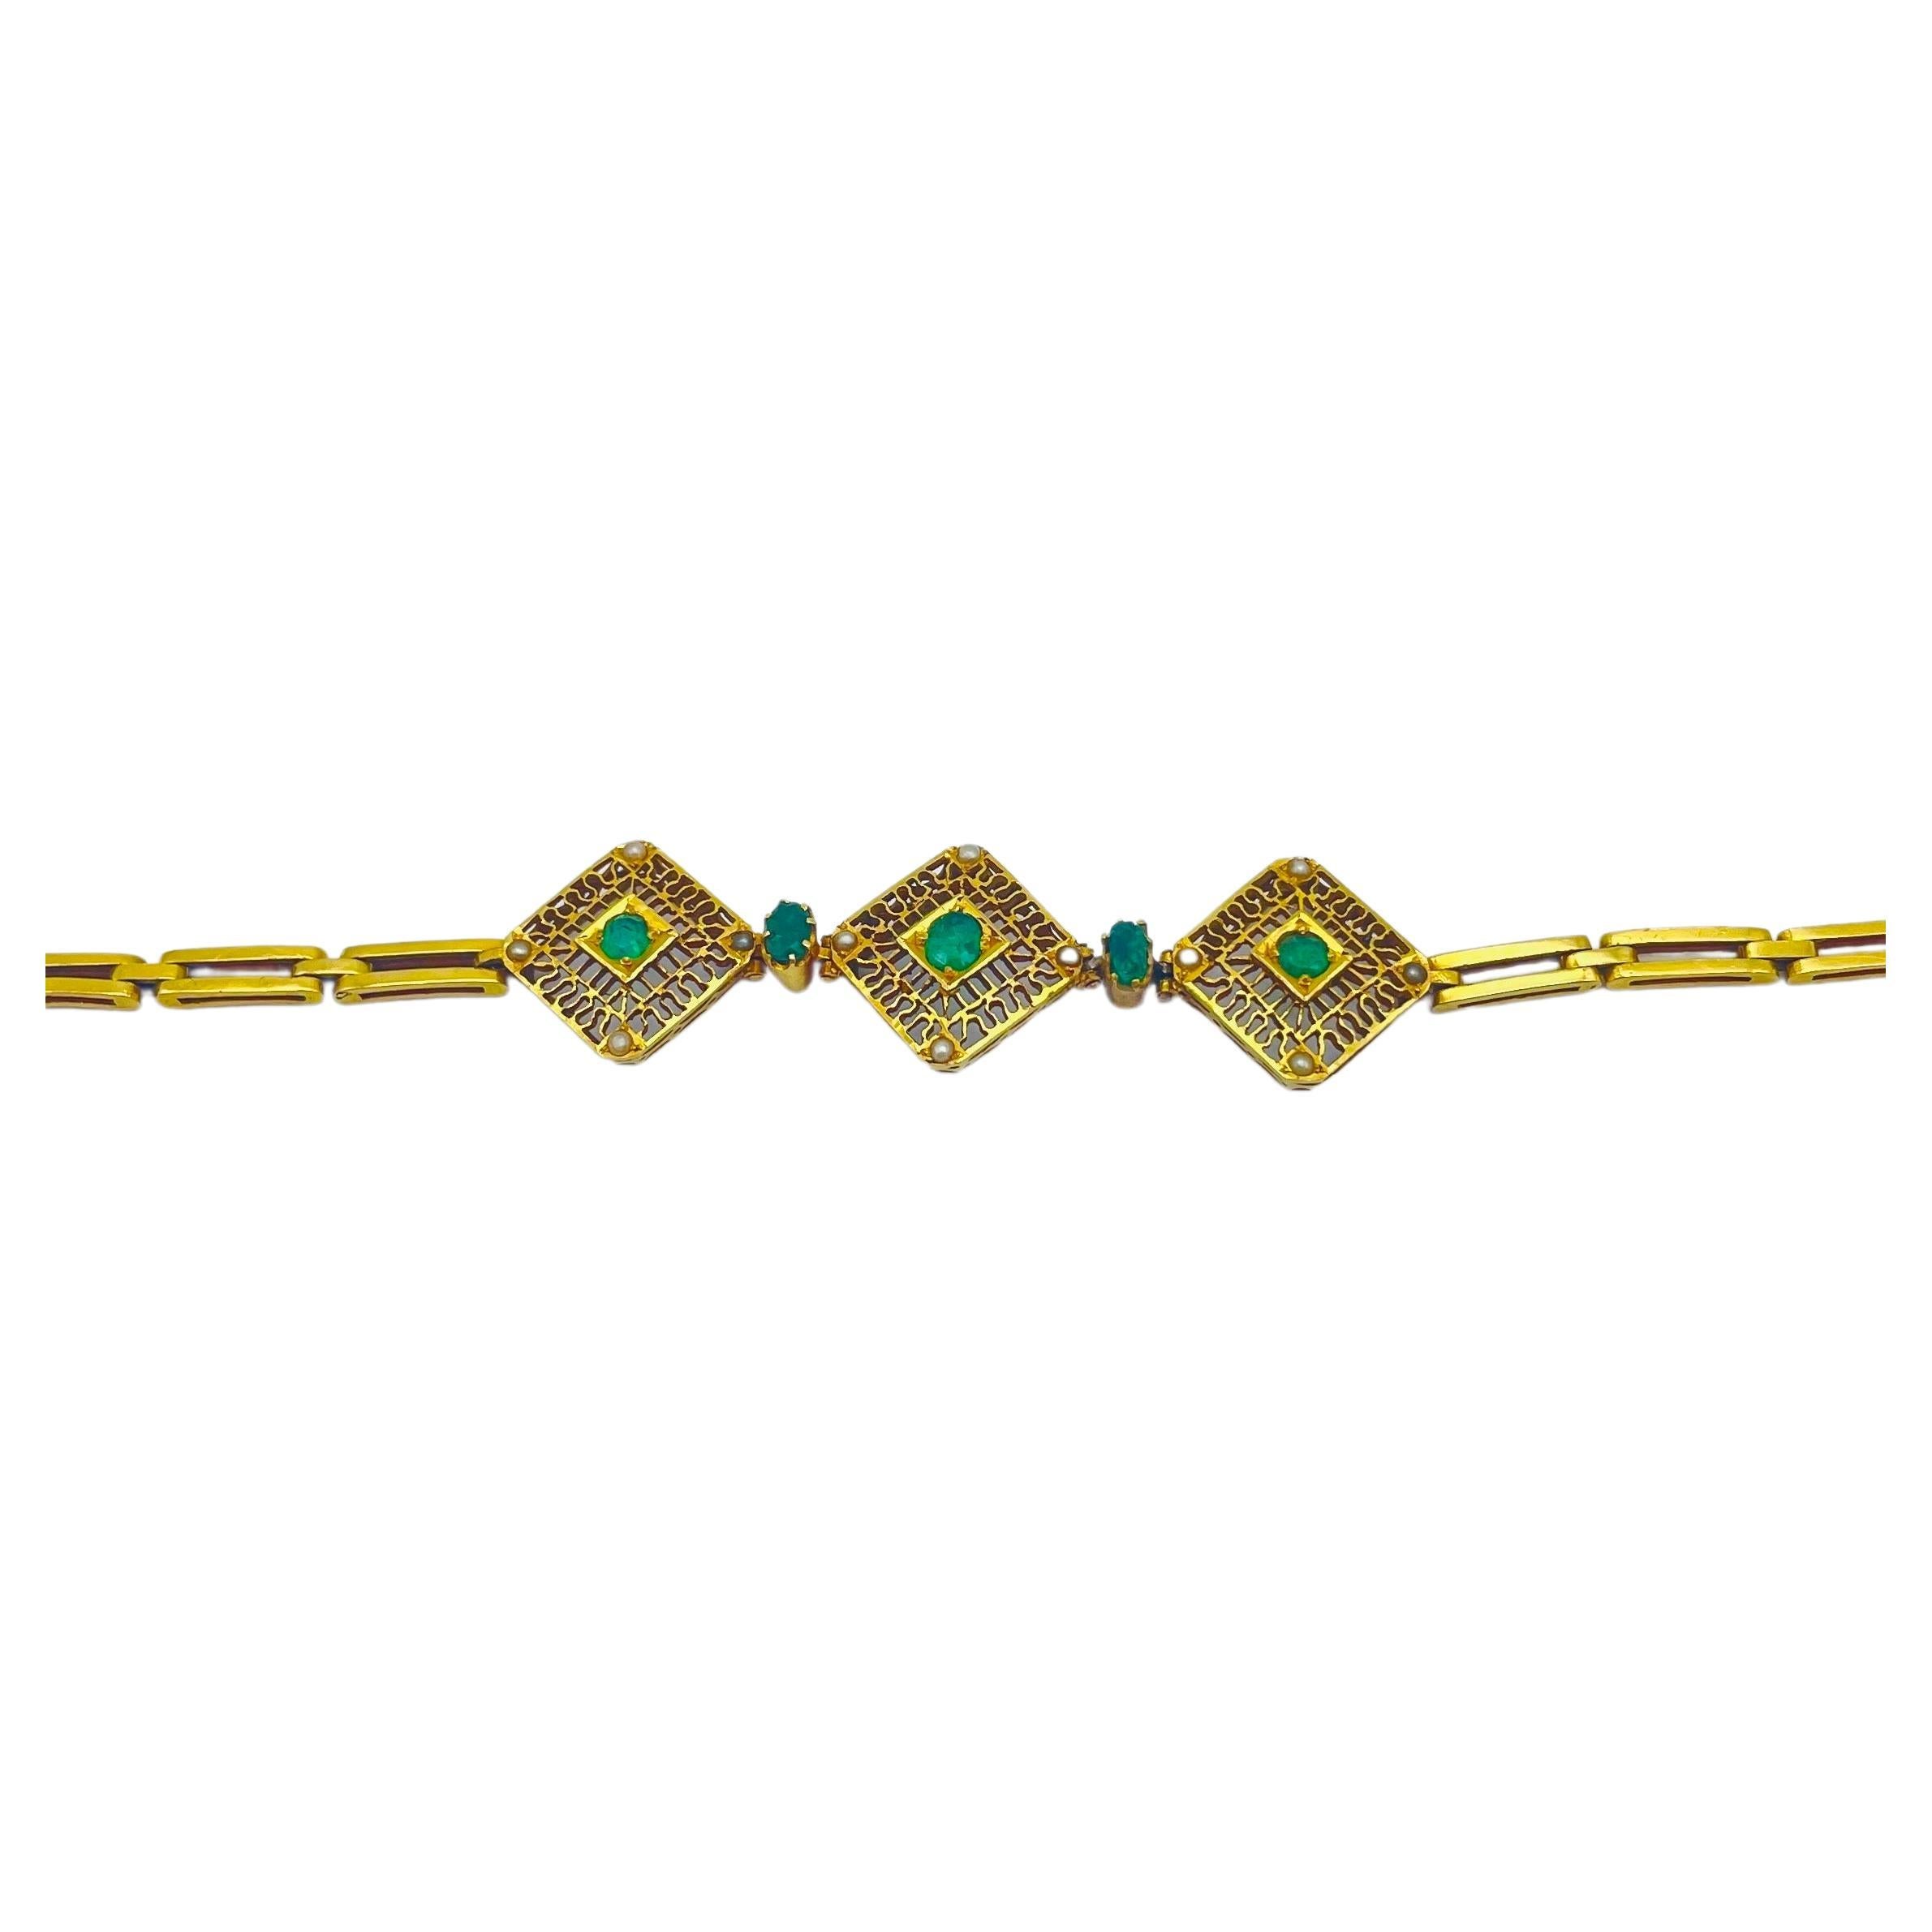 
Immerse yourself in the dreamlike beauty of this meticulously crafted bracelet, a masterpiece worked in 14k yellow gold and styled in the Art Deco fashion. This stunning piece features captivating emeralds and pearls, showcasing an intricately